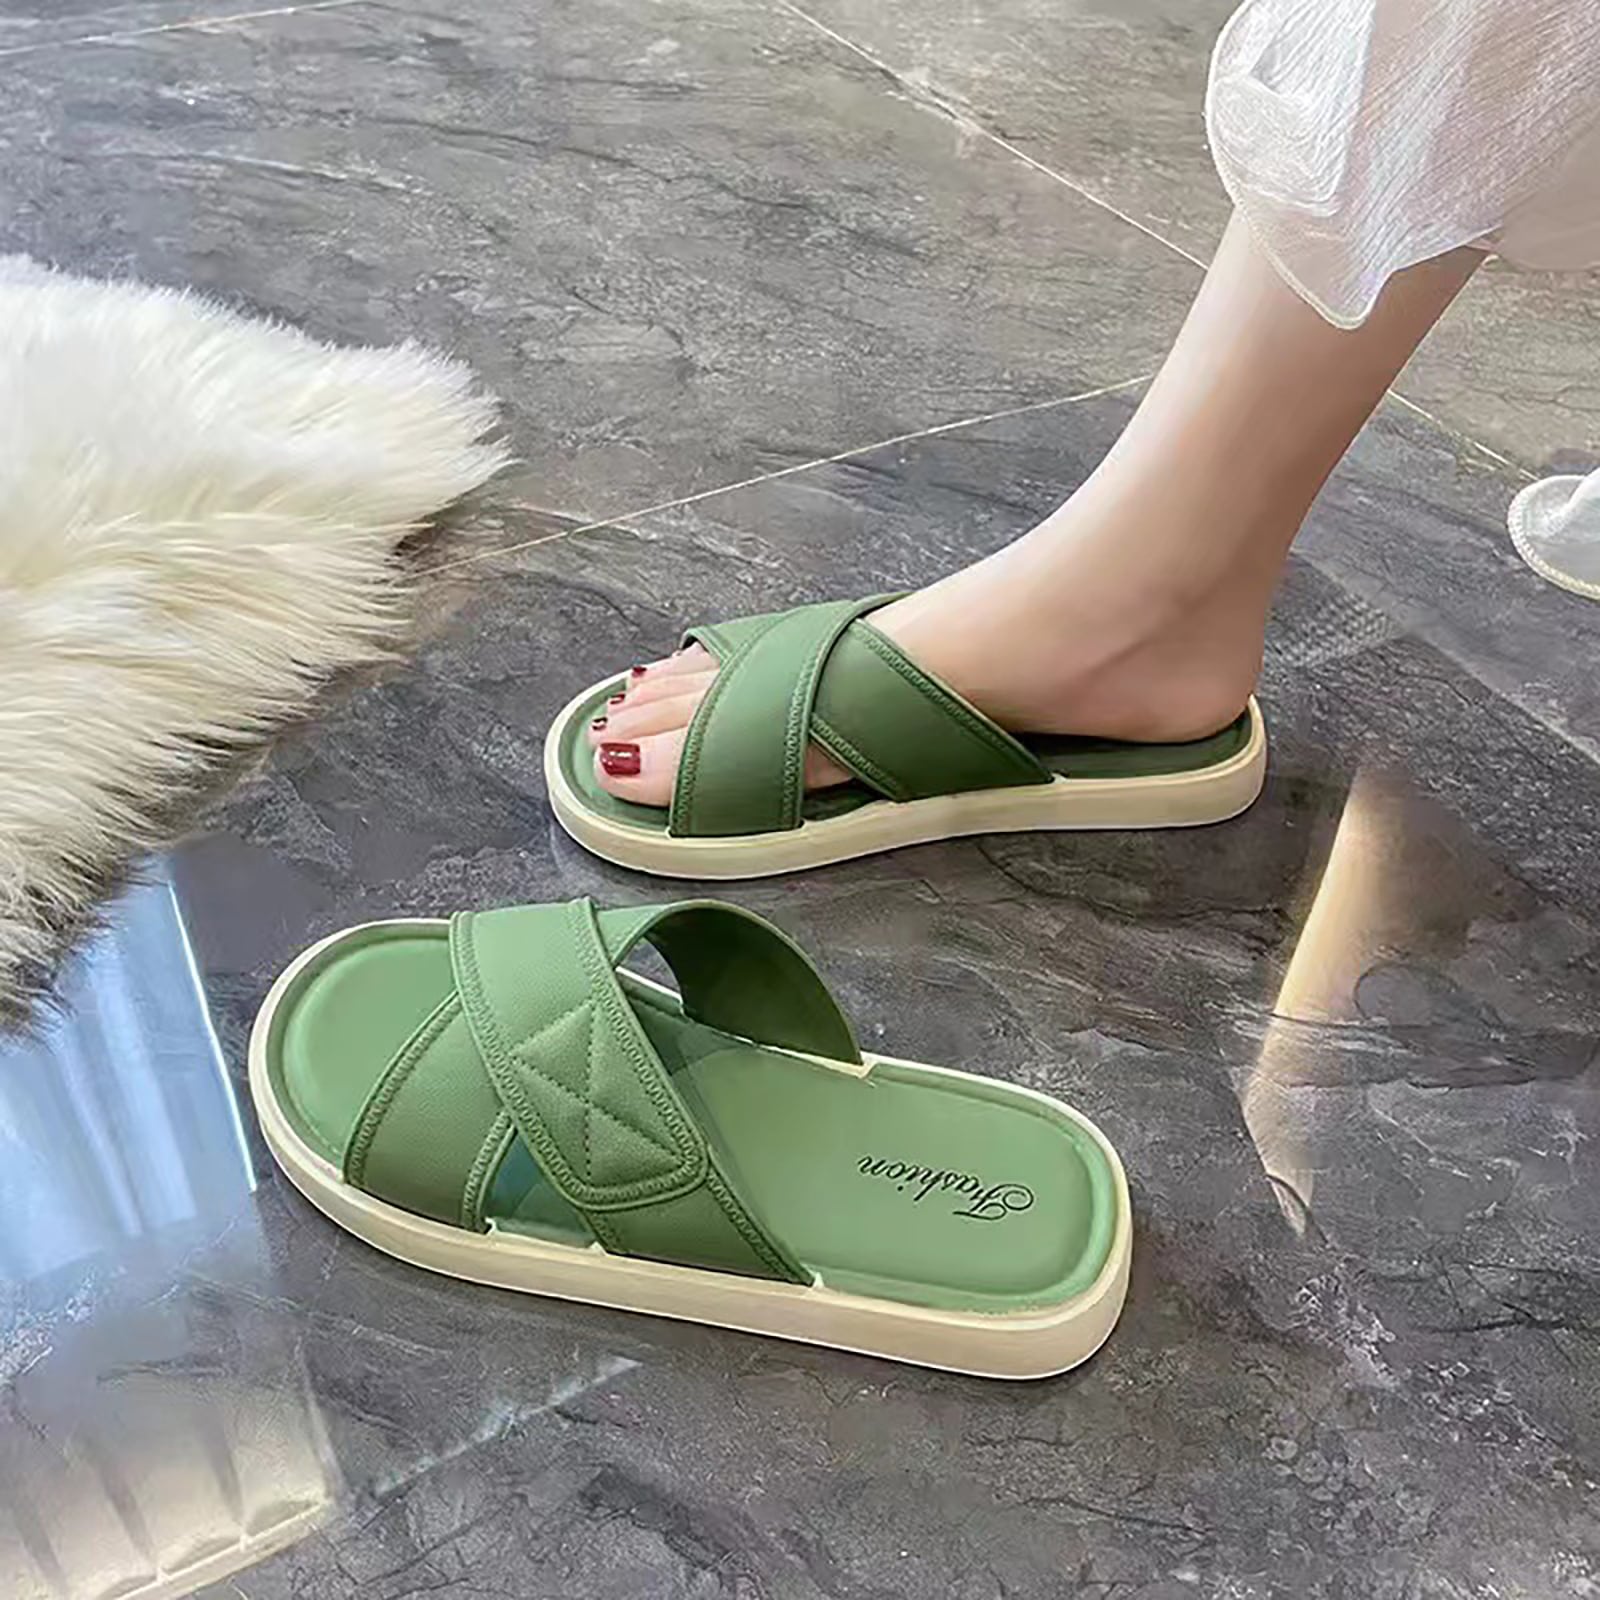 New Arrival Simple, Elegant And Versatile Slippers With Soft Pvc Outsole For Anti-Slip On The Beach And In Home Bathroom - Suitable For Indoor And Outdoor Wear, Giving You A Chic And Fresh Ins Look-Green-10